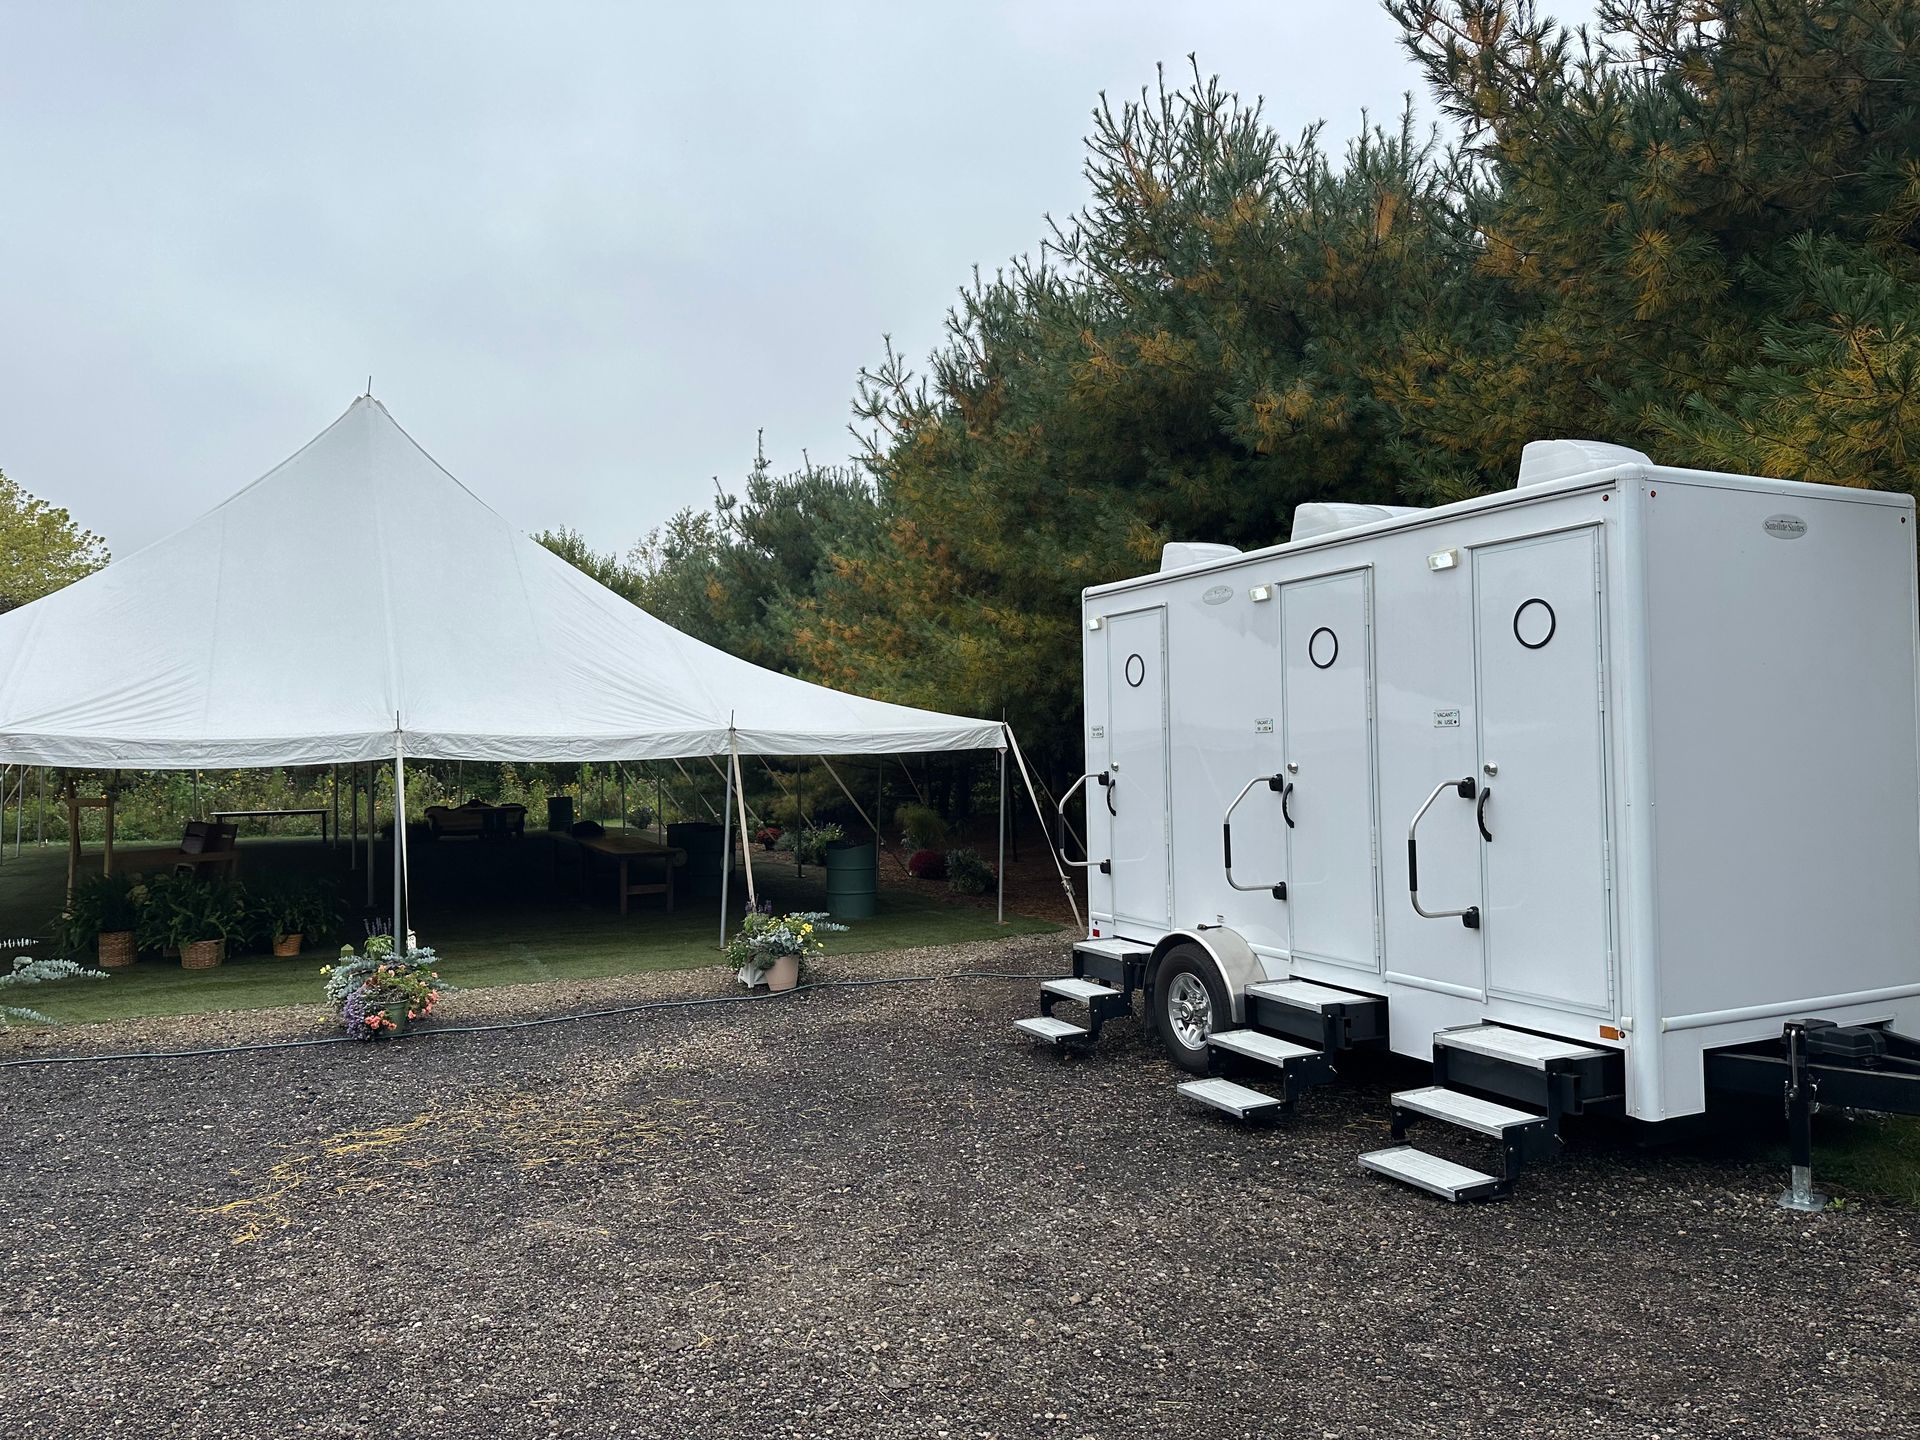 Wedding Restroom Trailers: A Guide for Restroom Trailers That Impress!